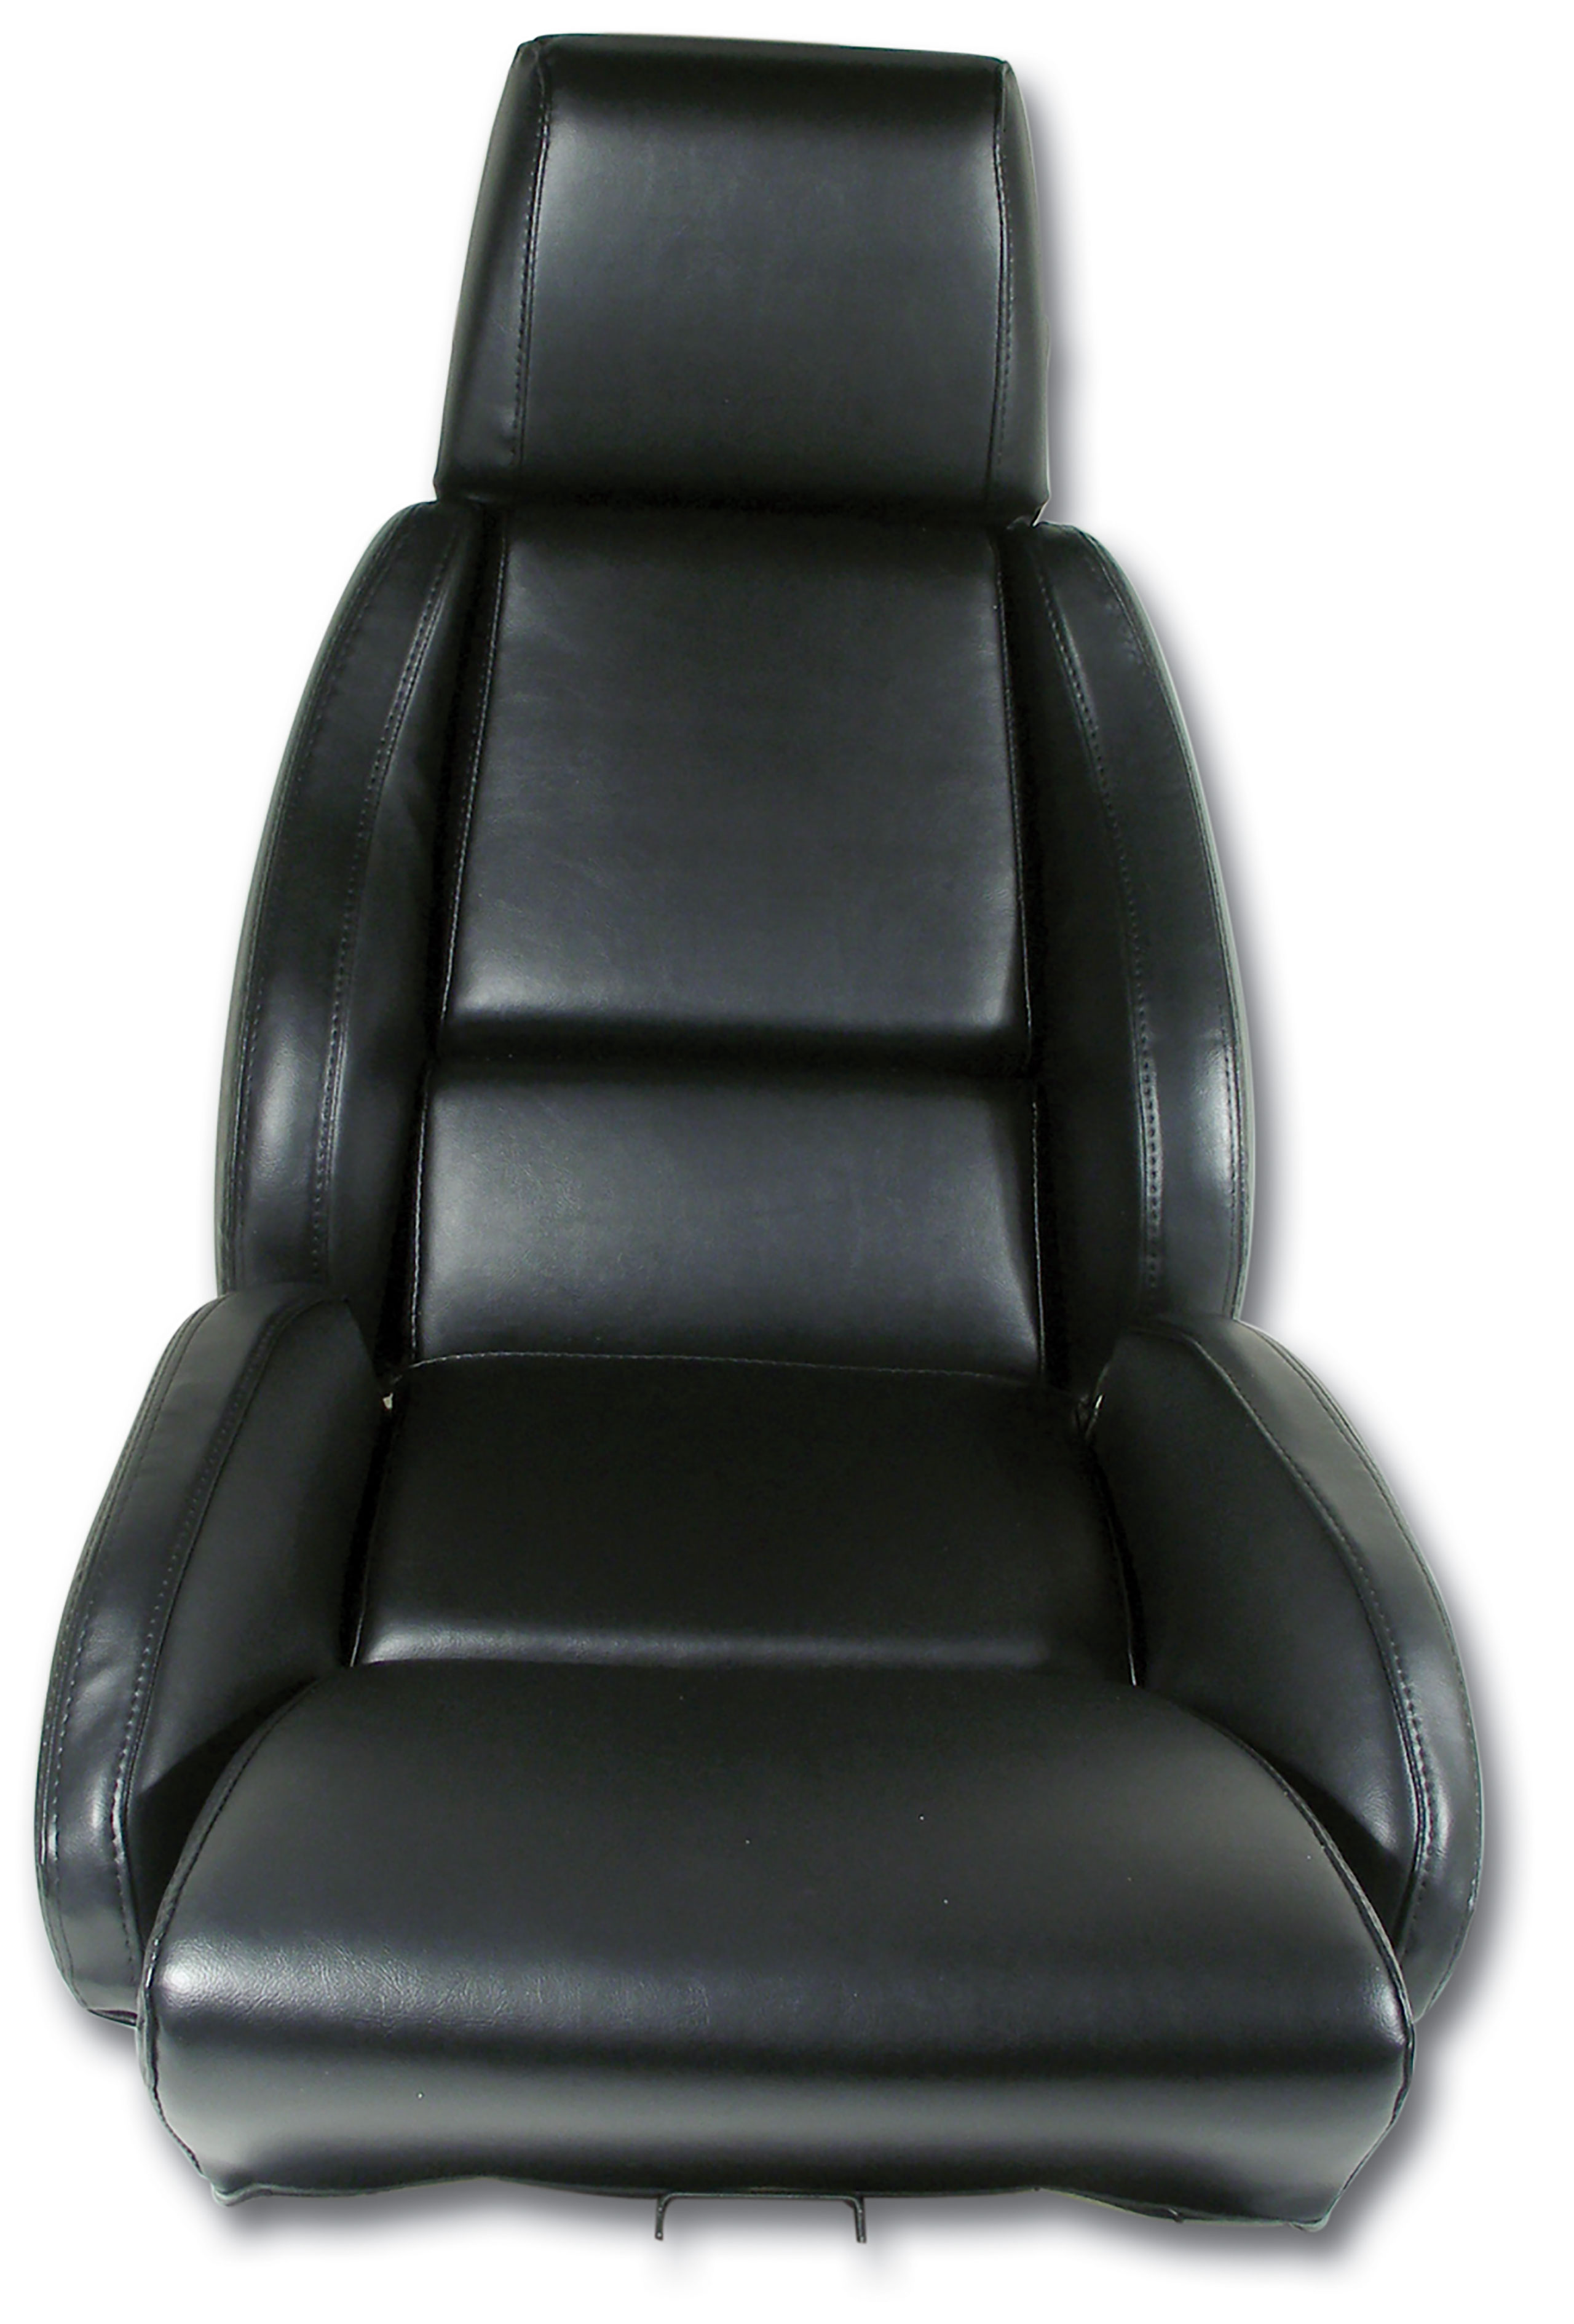 1984-1988 C4 Corvette Mounted "Leather-Like" Vinyl Seat Covers Black Standard No-Perforations